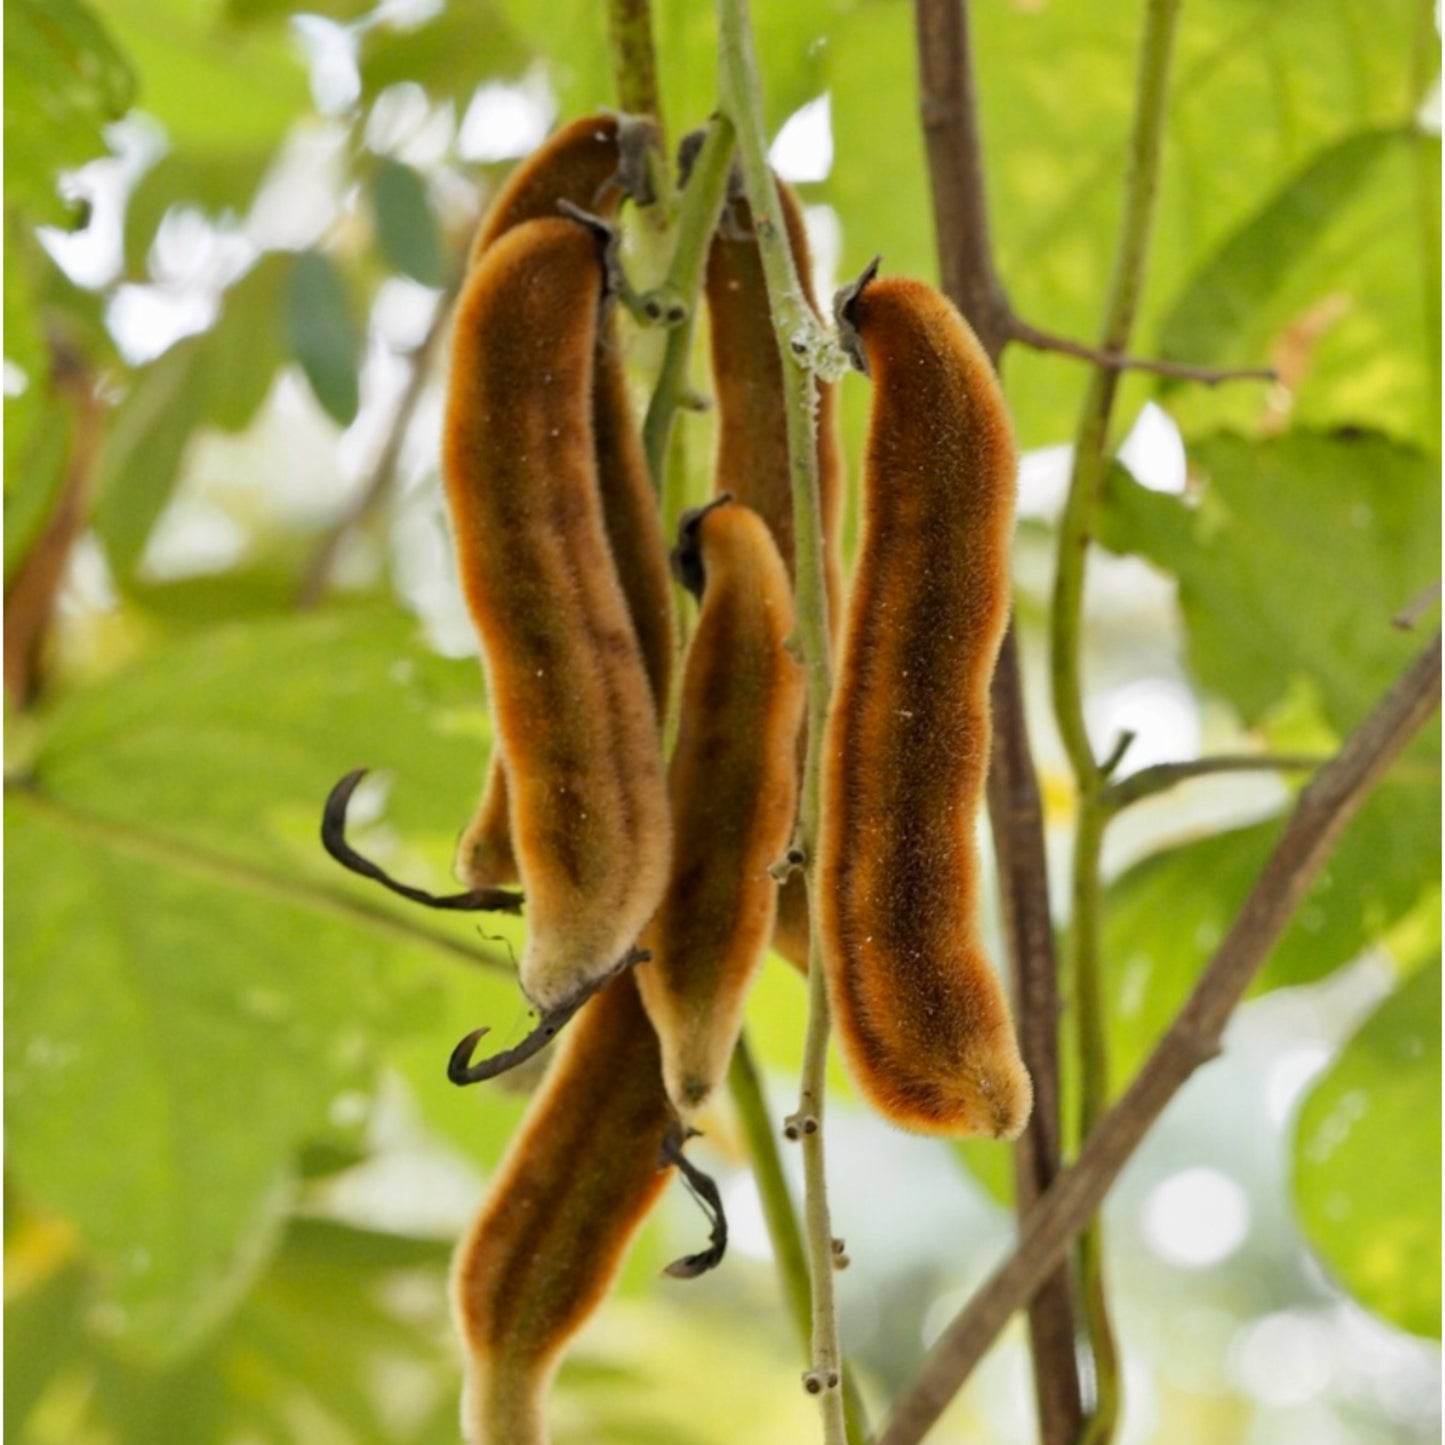 2 Mucuna Pruriens Extract 20:1 - Two Ingredients